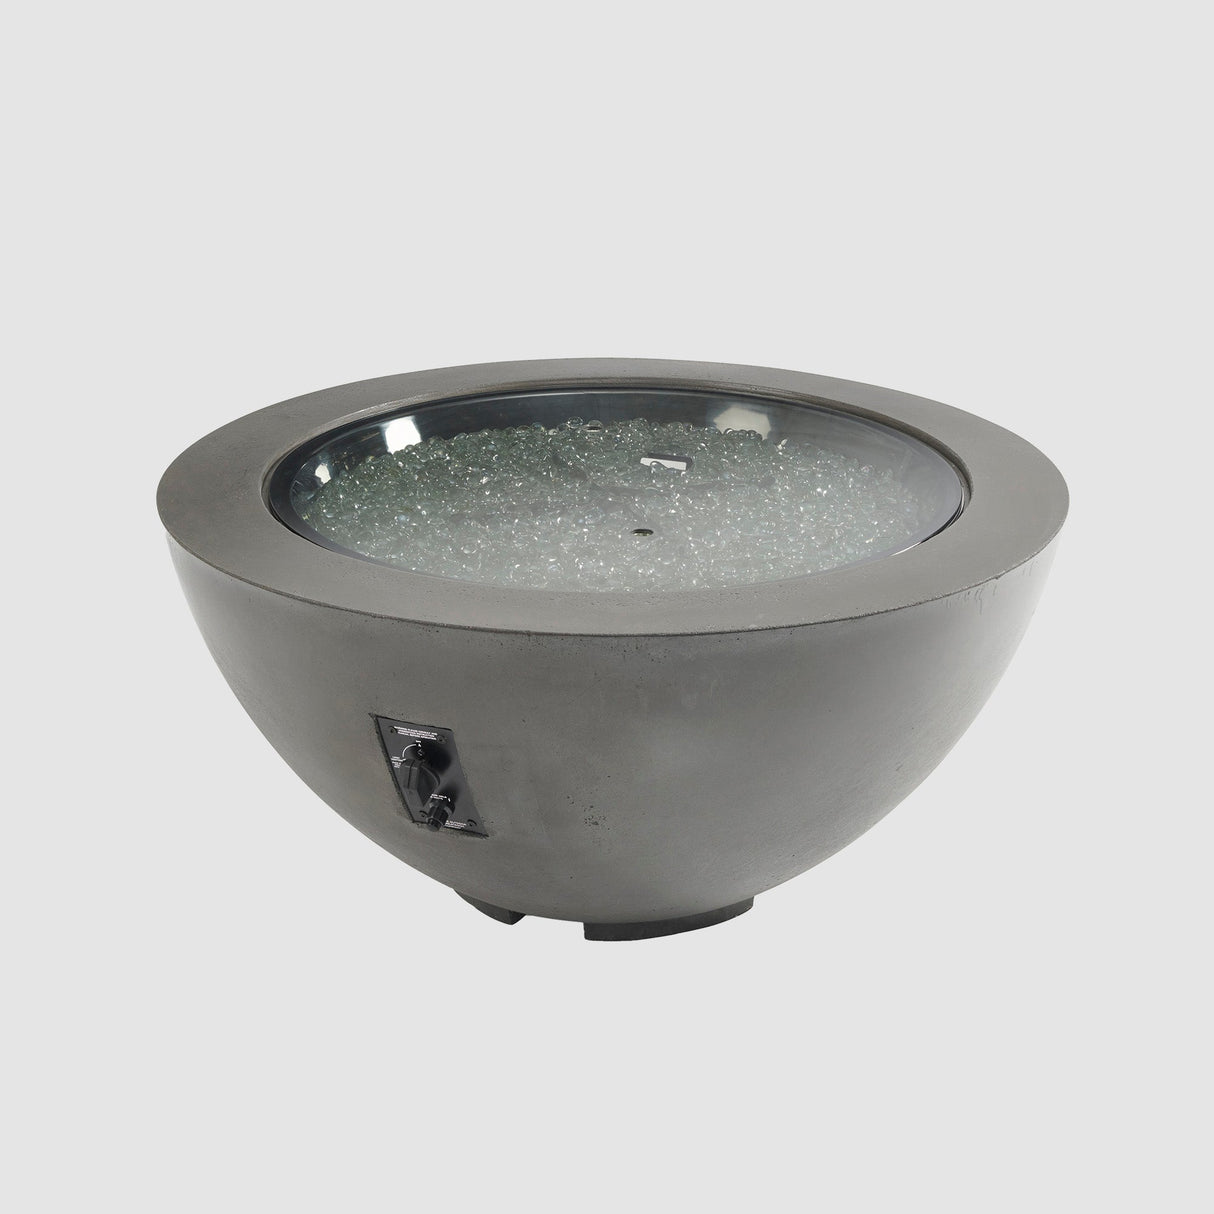 A cover placed on the burner of a Midnight Mist Cove Round Gas Fire Pit Bowl 42" on a grey background